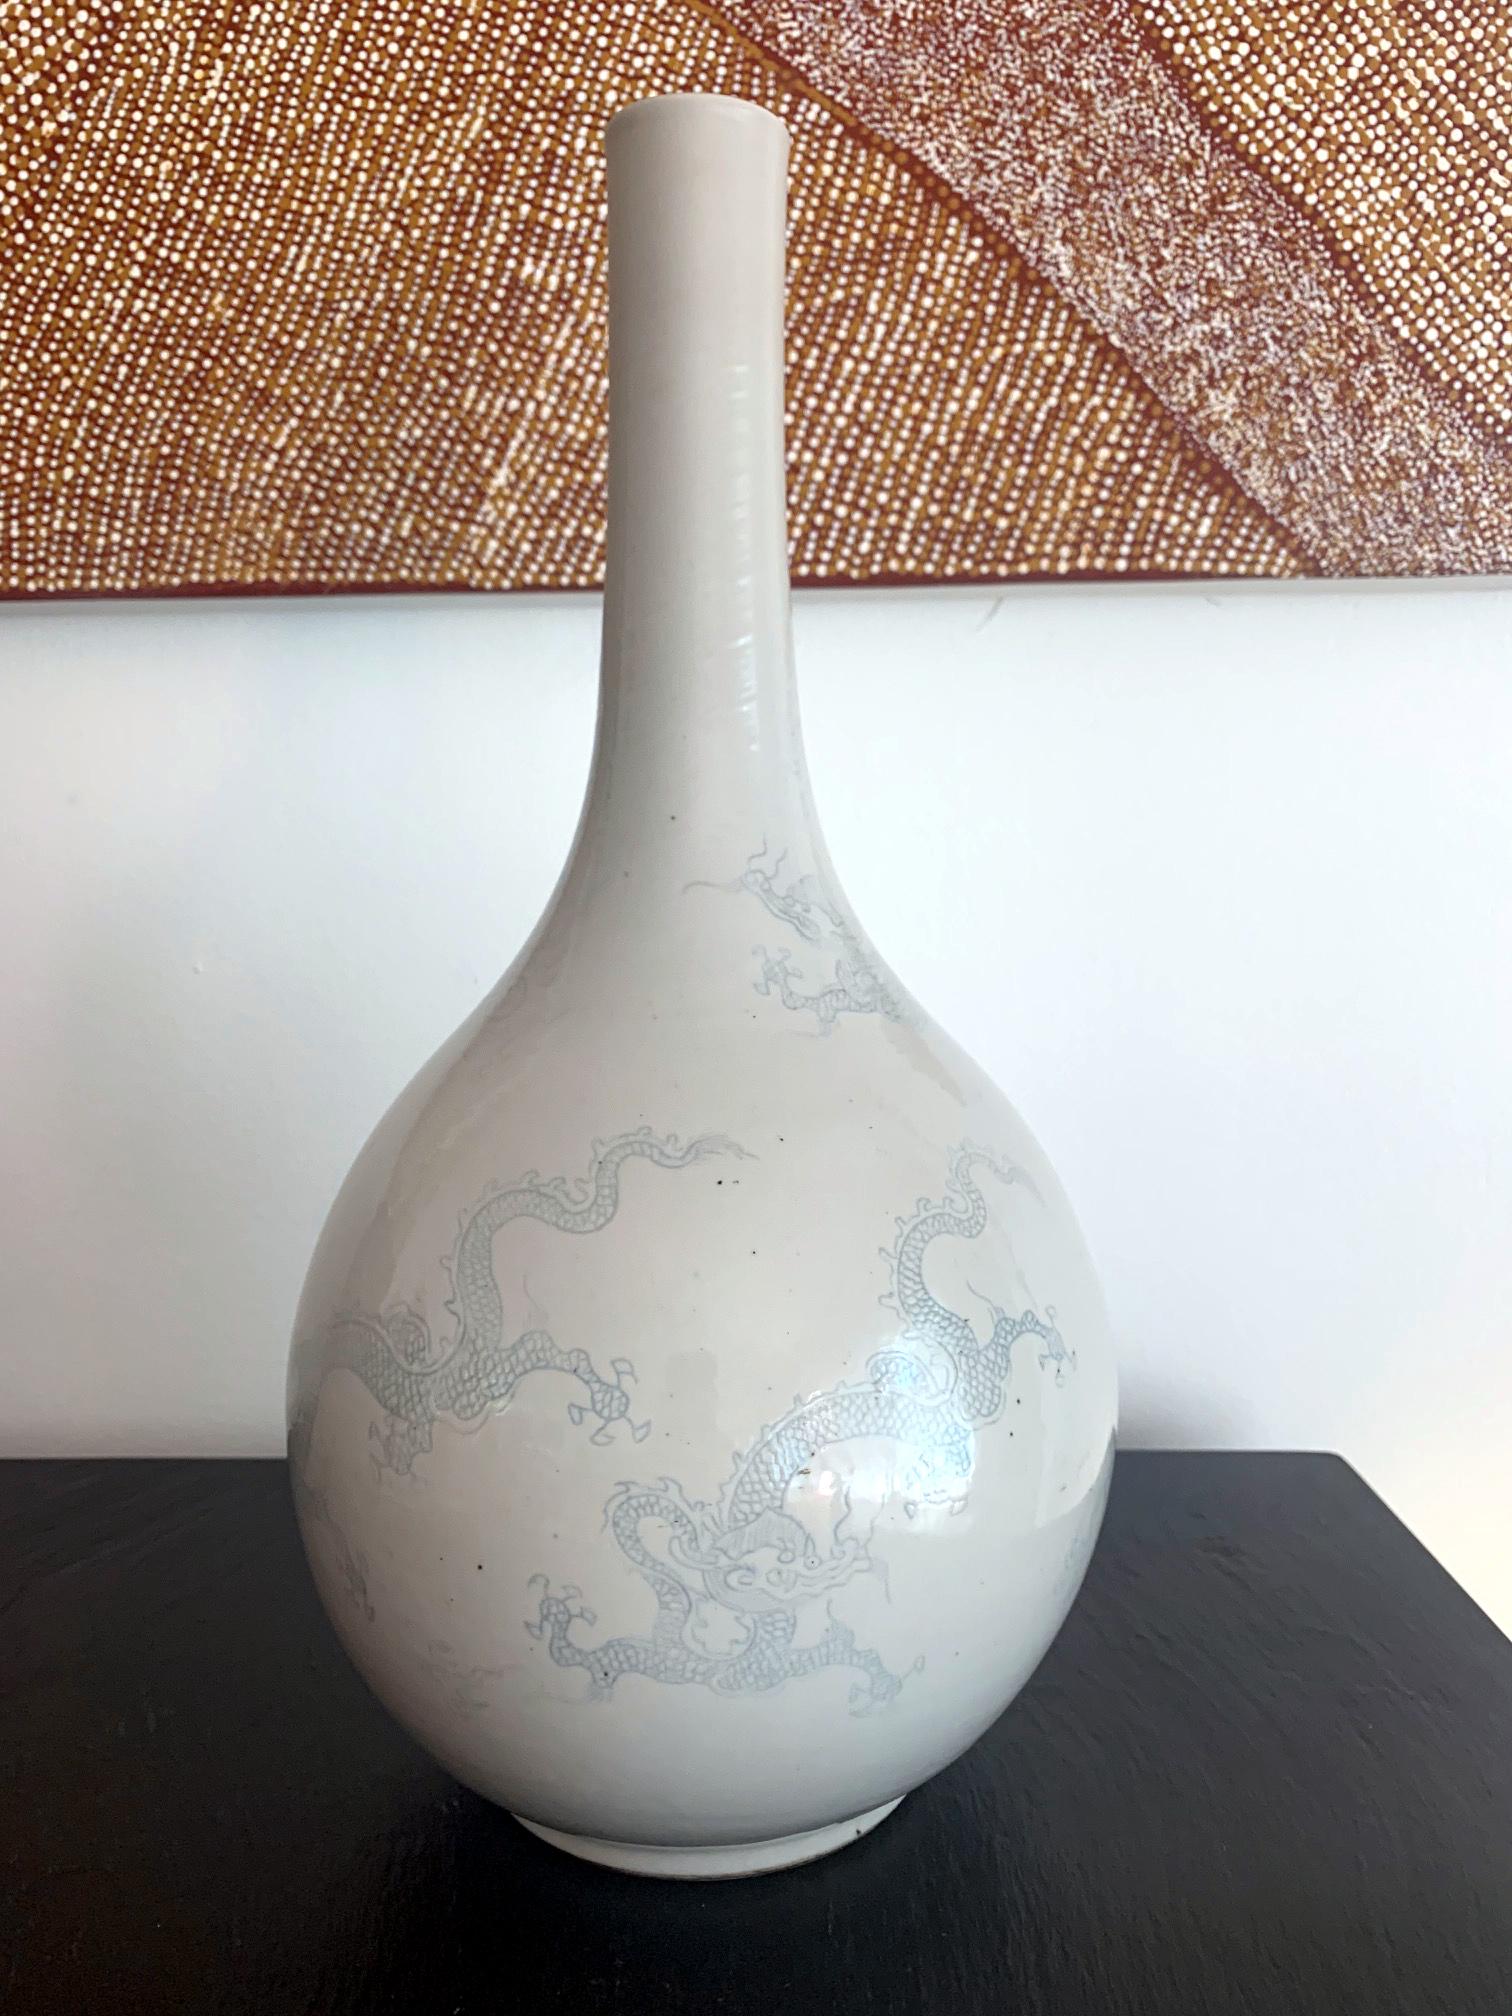 A large Korean Dragon Vase in an elegant classic form, with a straight neck and mouth and base rim. The white surface is beautifully decorated with five blue underglaze flying dragons chasing flaming pearls. The white over glaze was applied in an